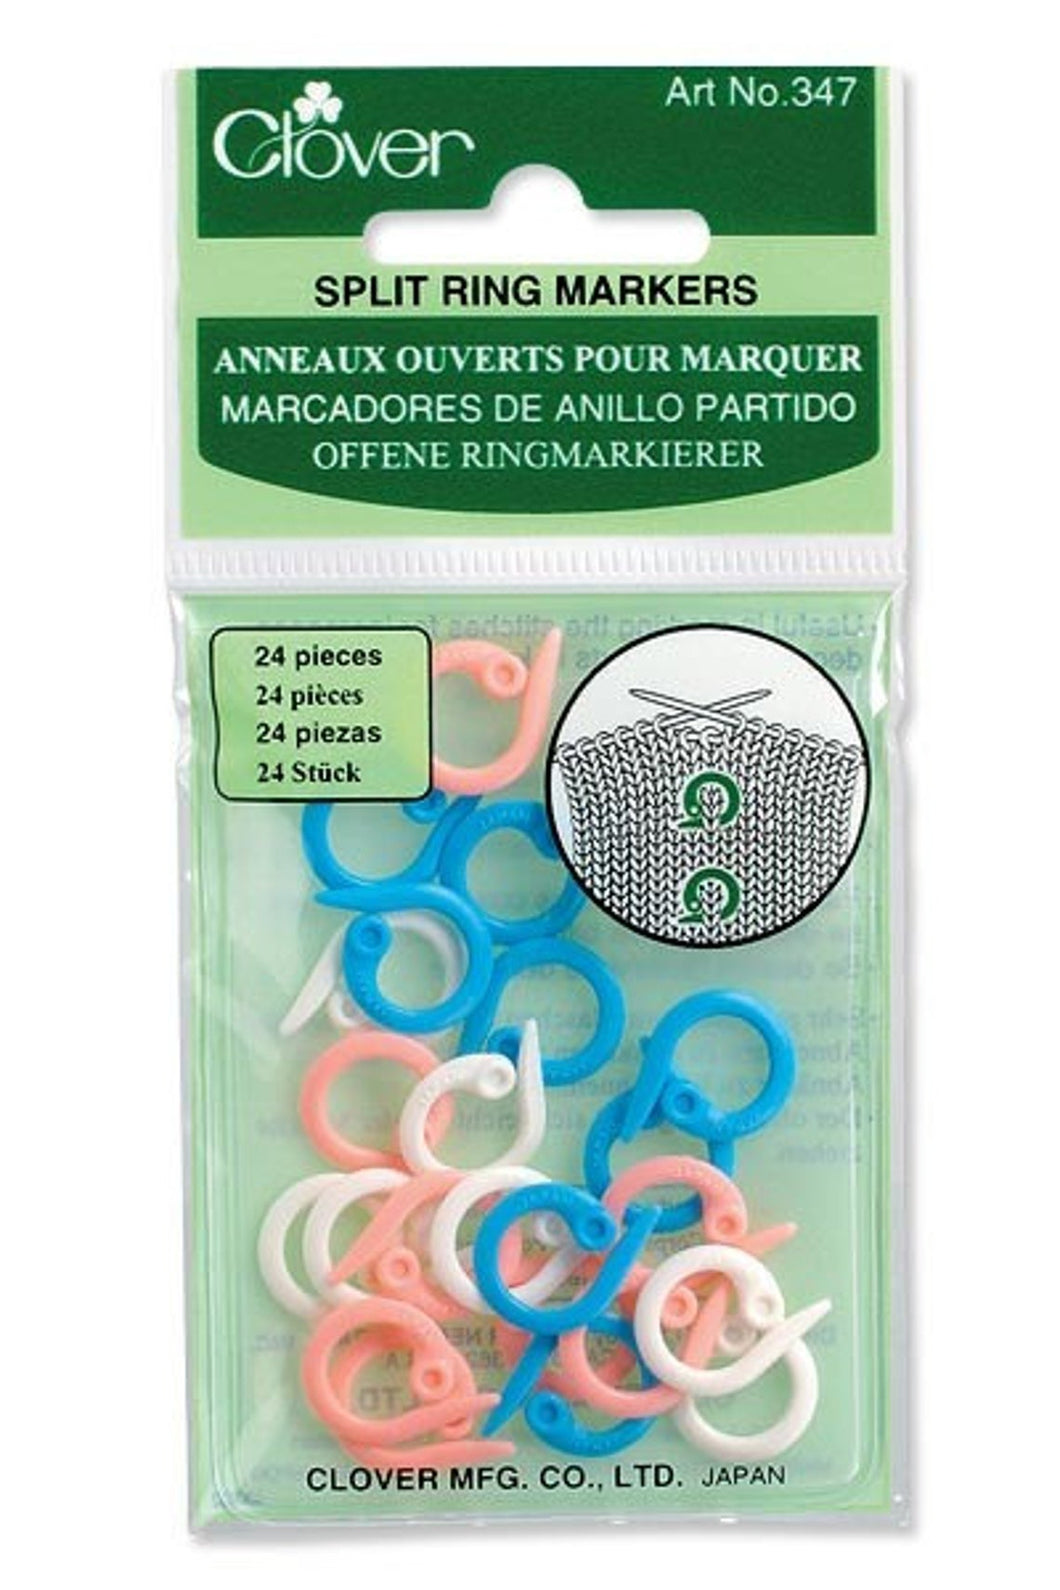 Stitch Markers - open style